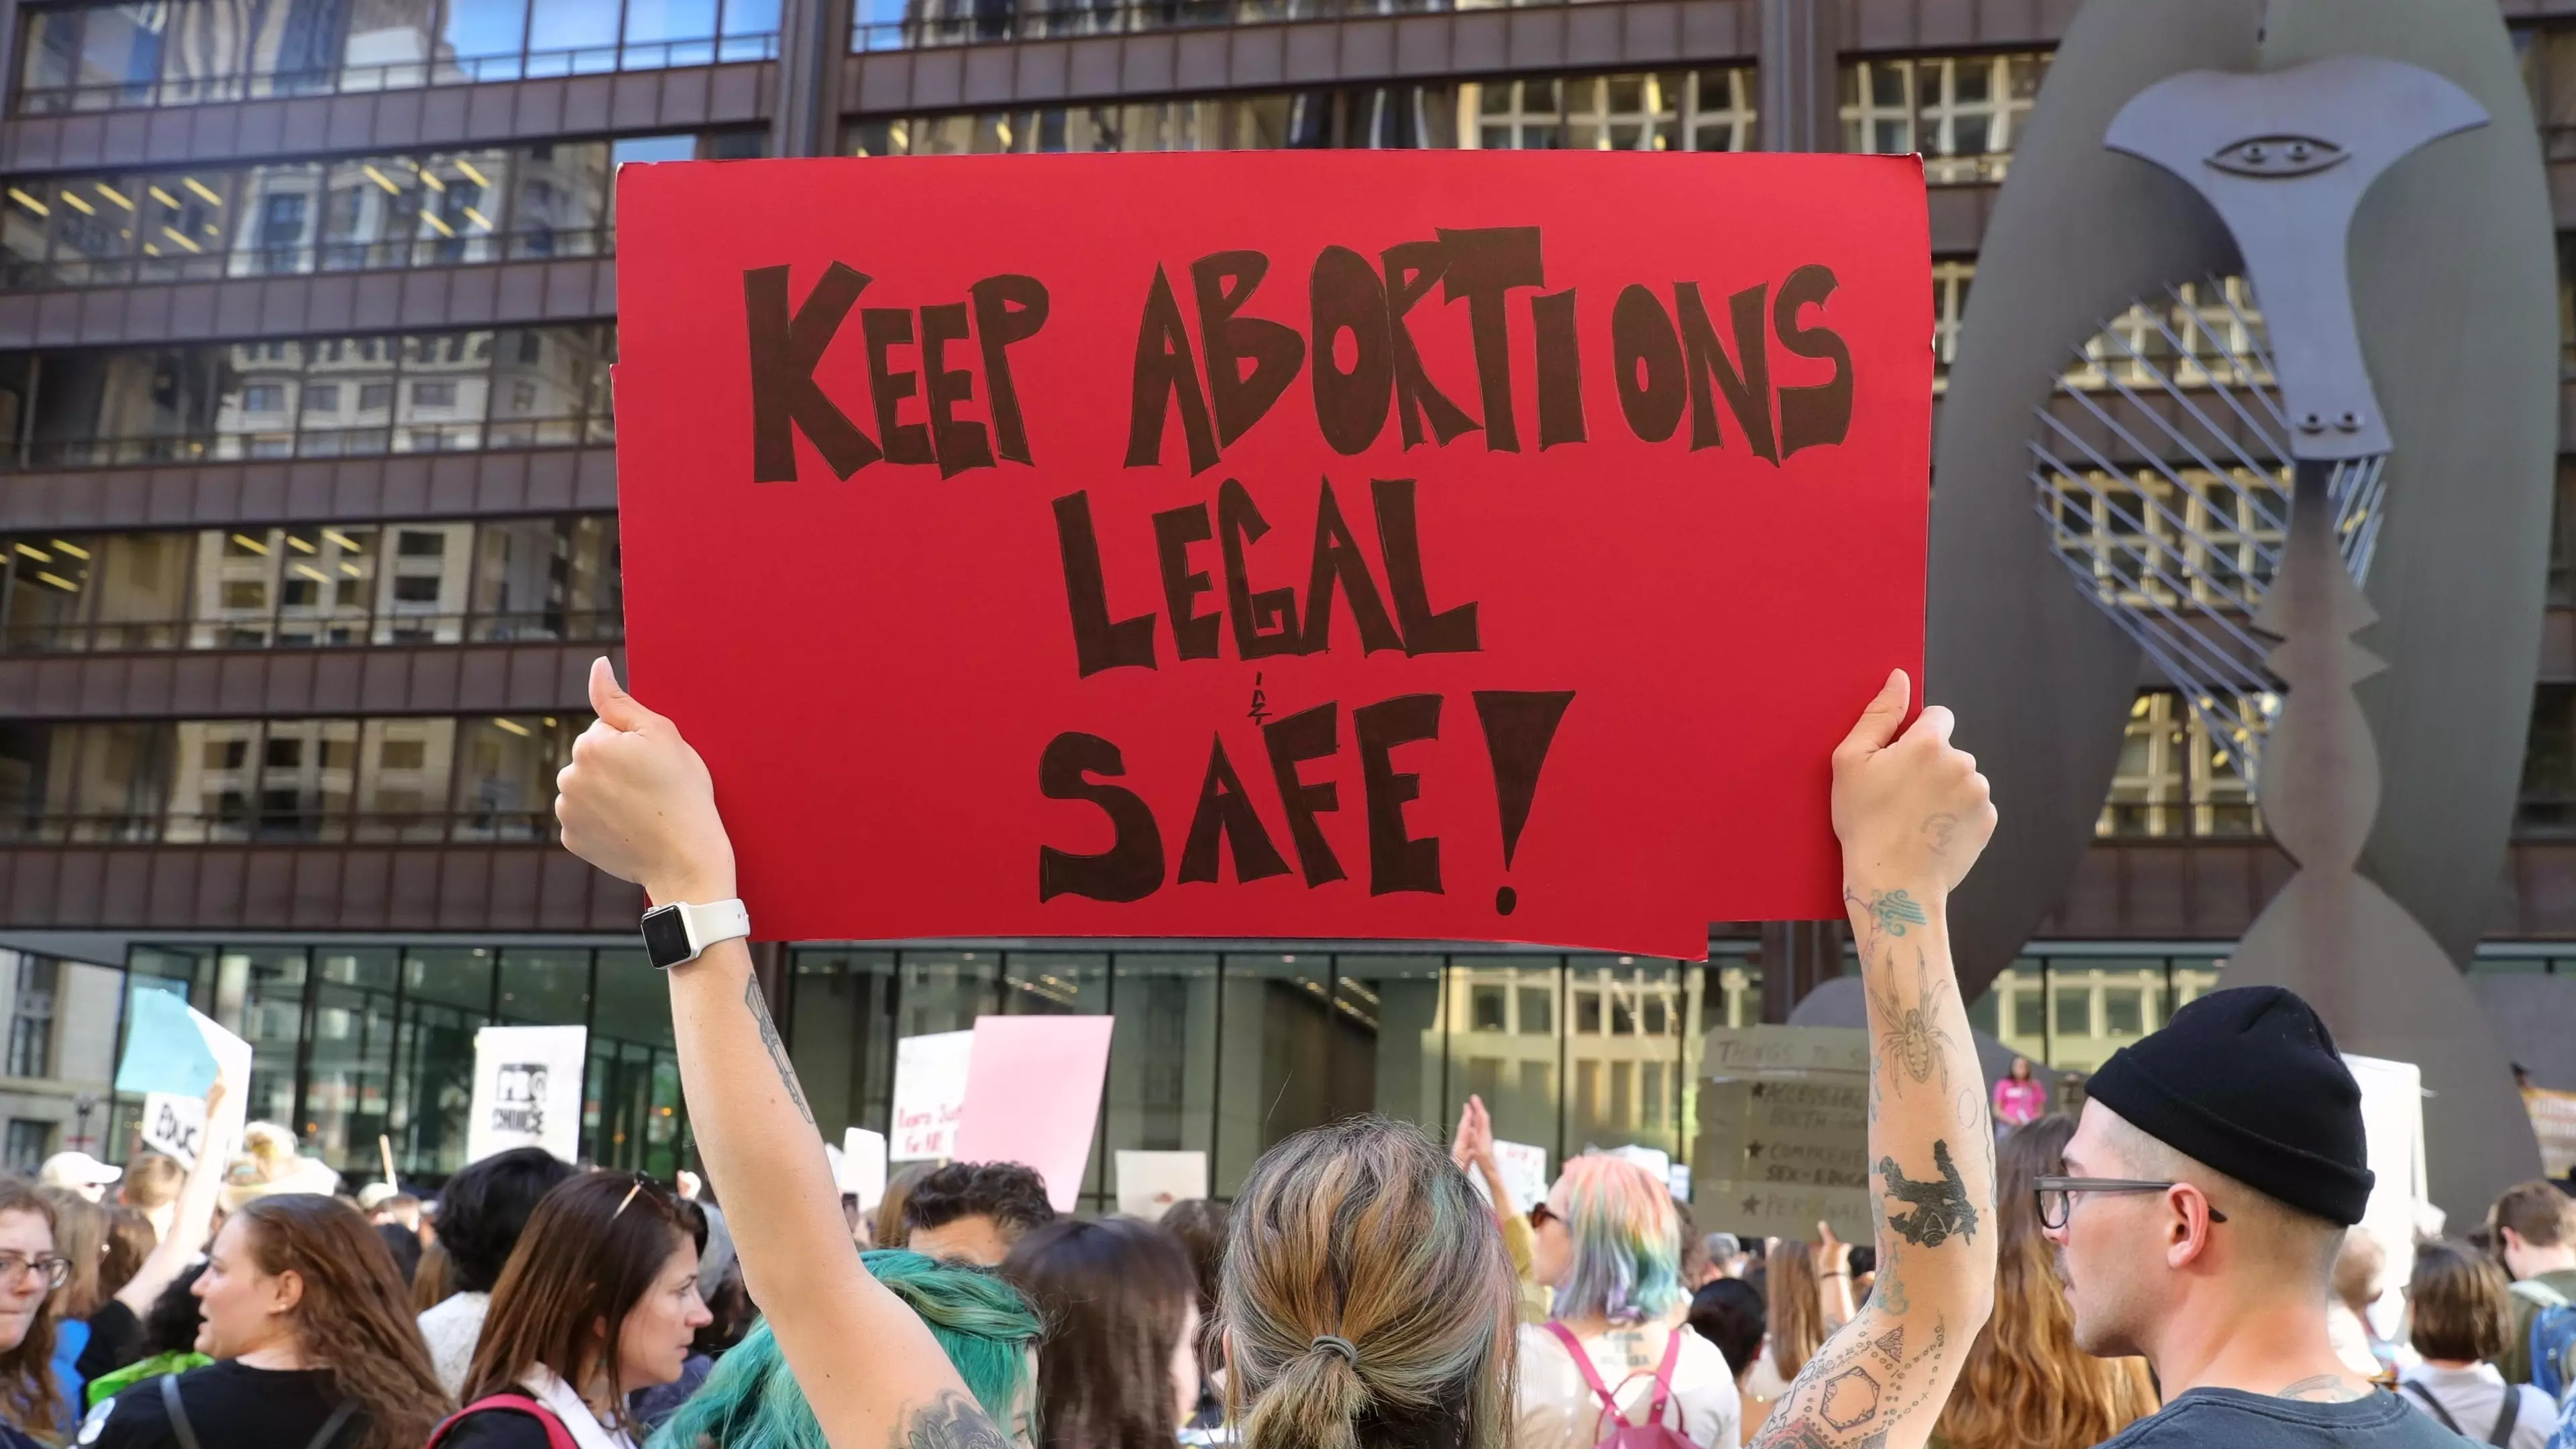 New South Wales Set To Overturn 119 Year Ban On Abortion This Week